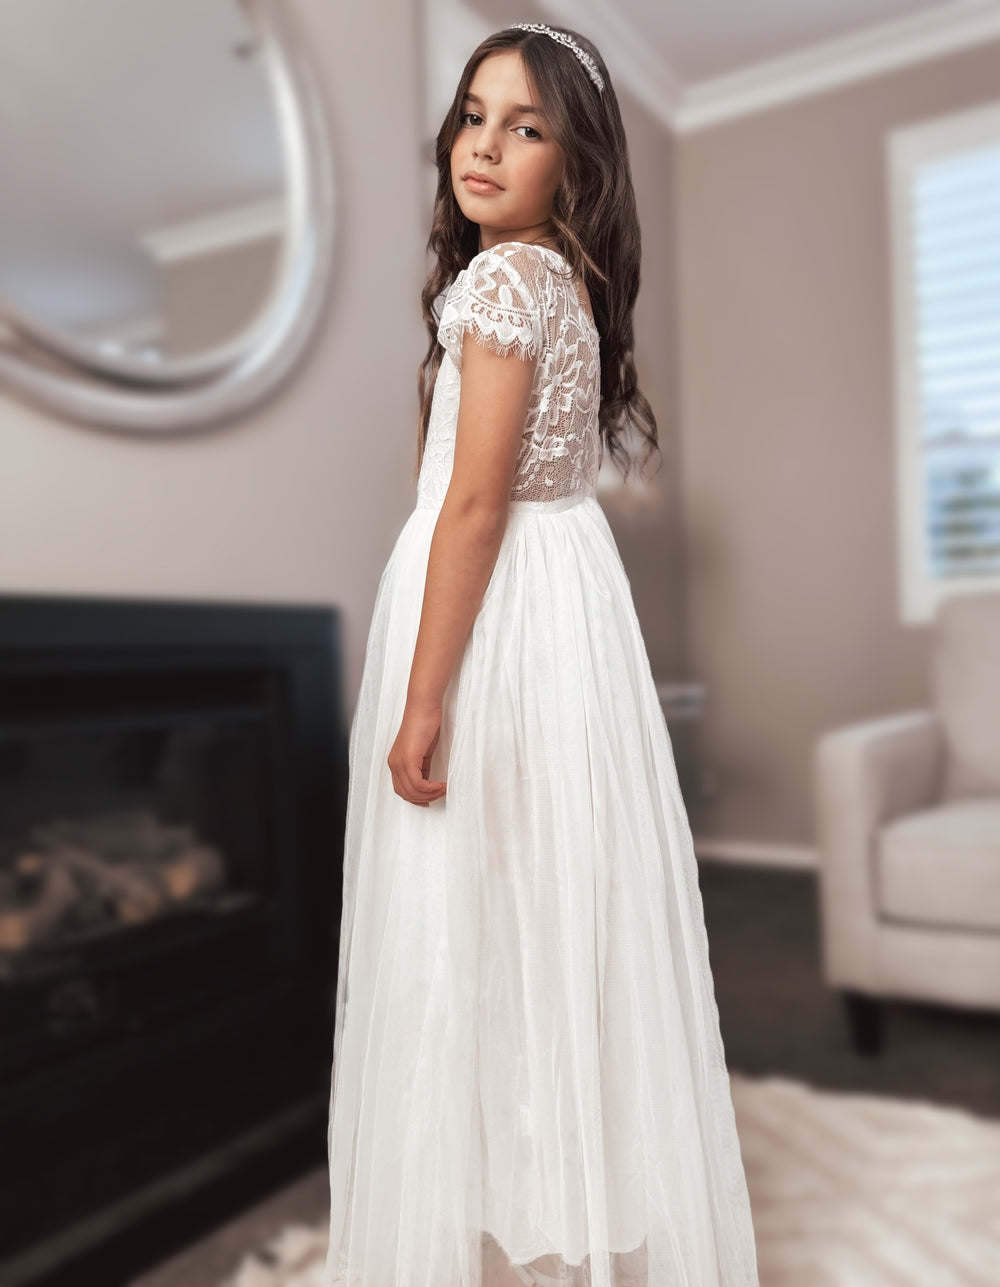 Celeste Girls White Lace & Tulle Dress - Not on saleWhite first communion dress - lace